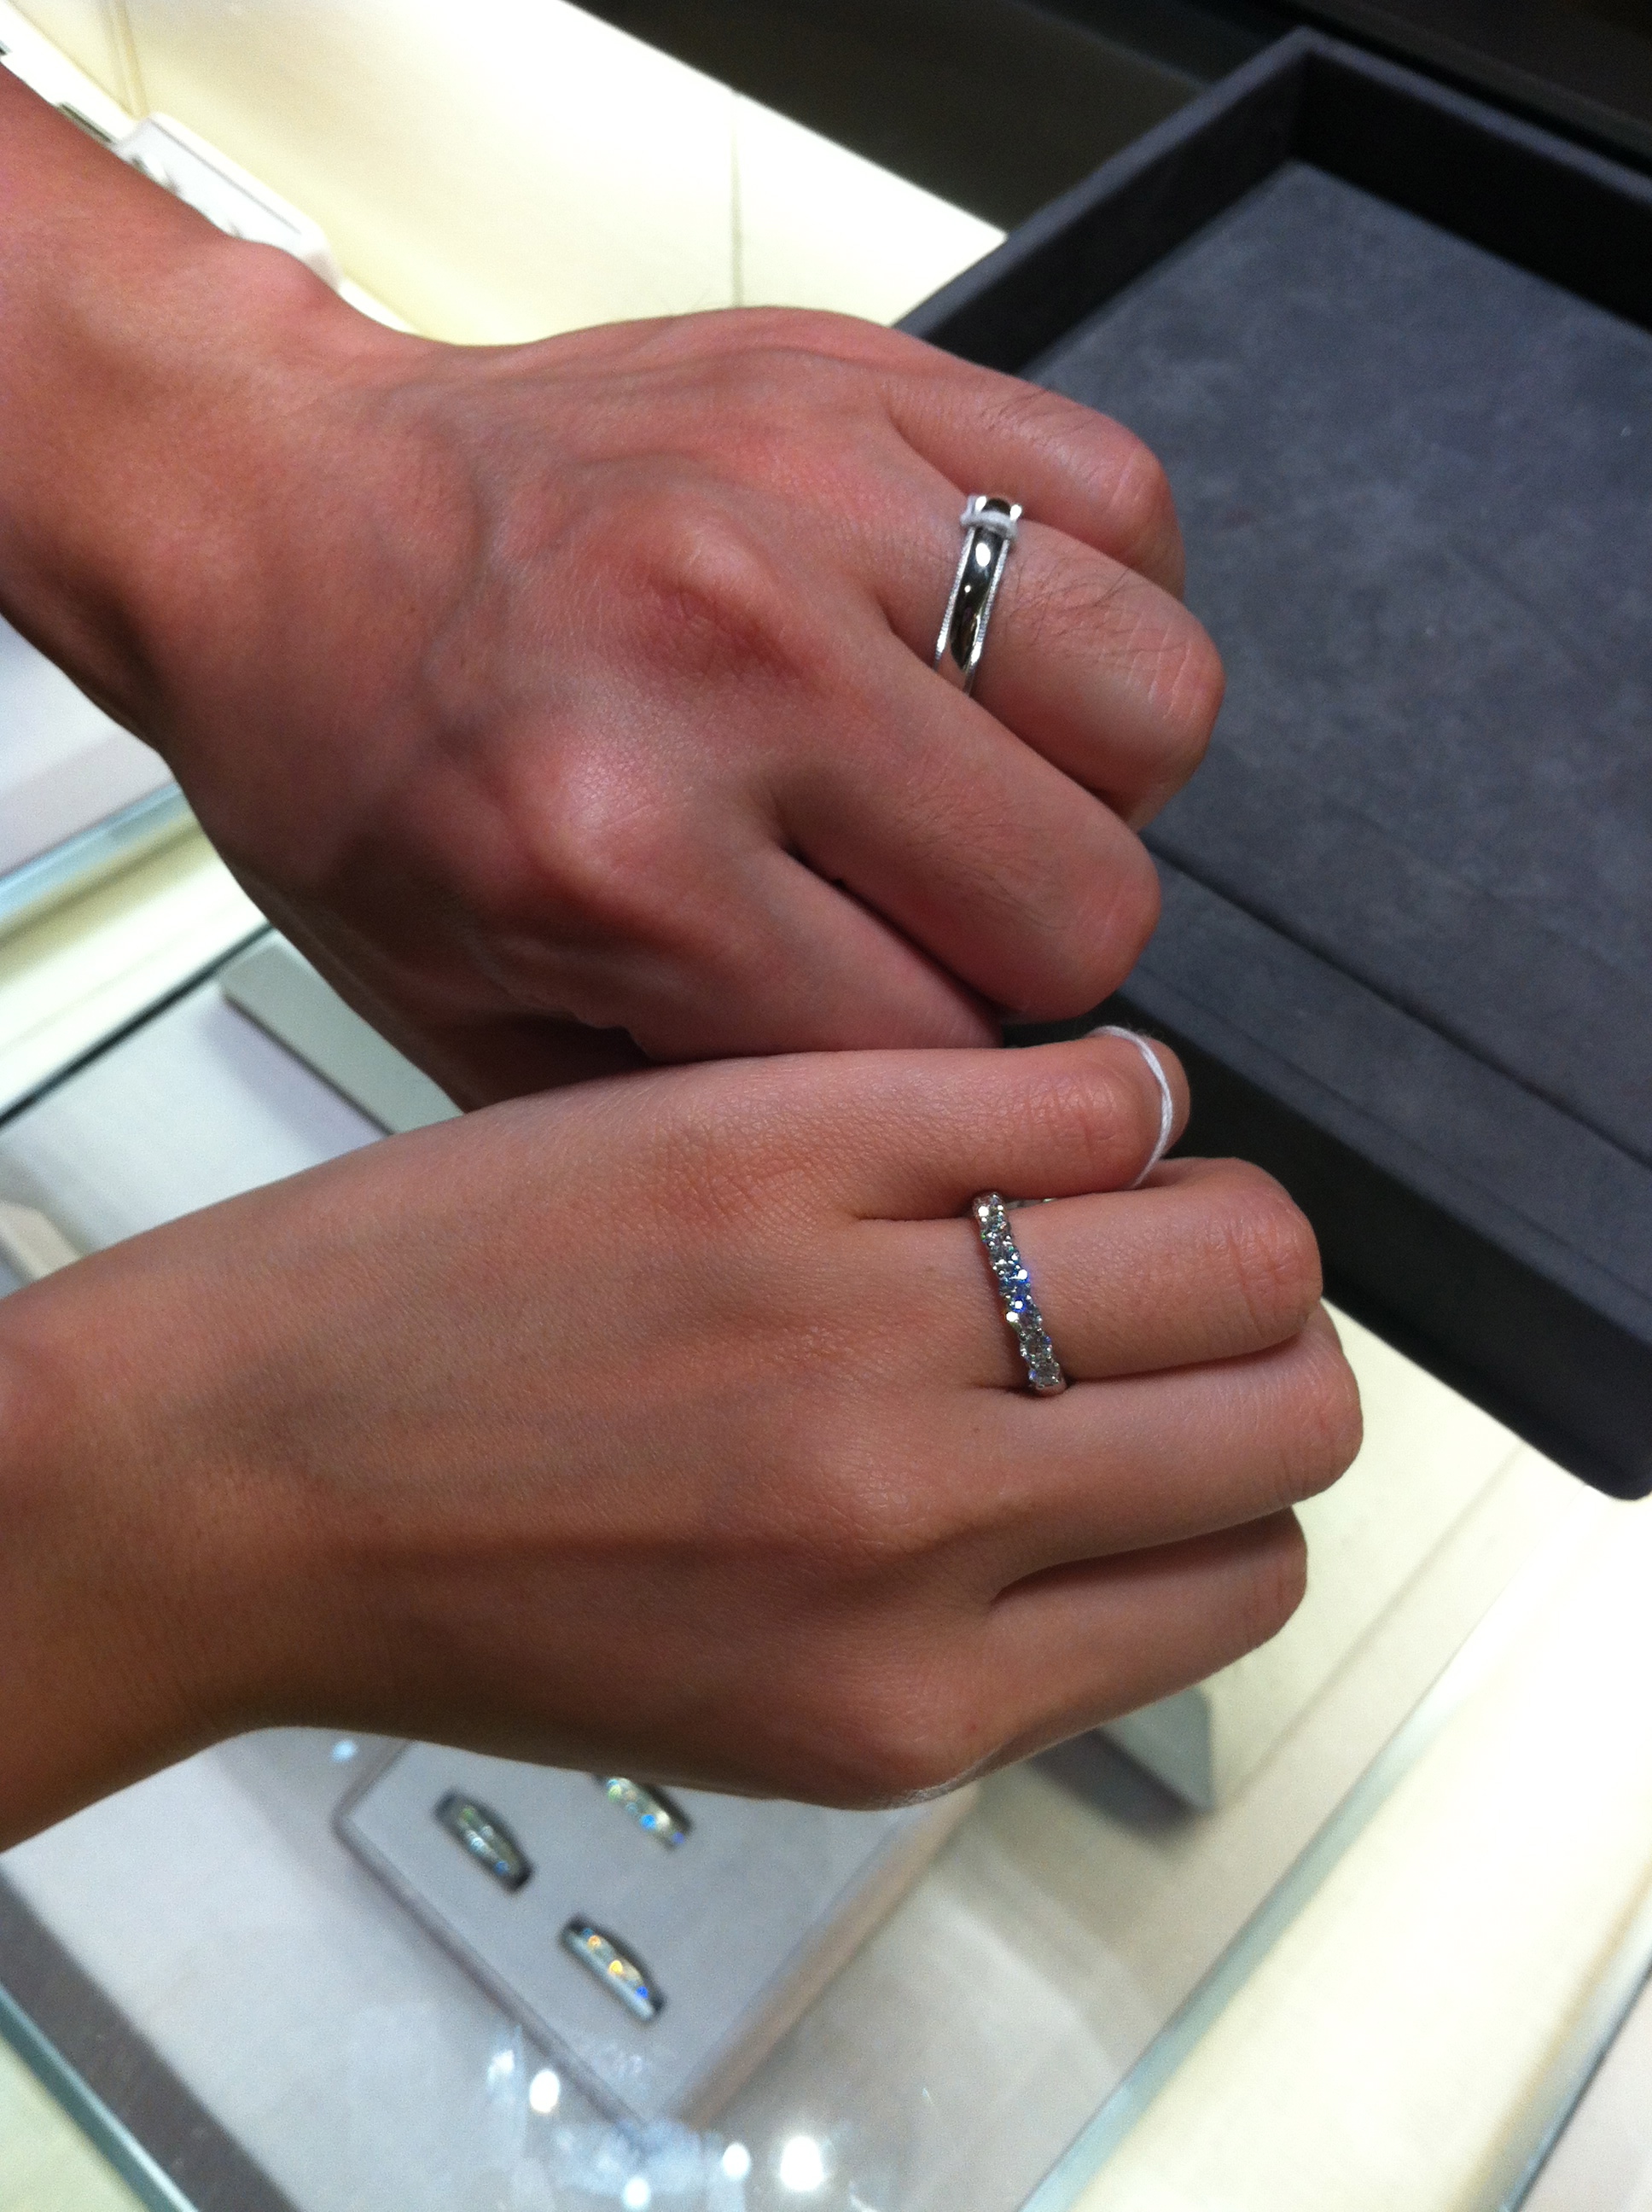 Choosing our Wedding Bands @ Tiffany's! - Wedding, Cities ...